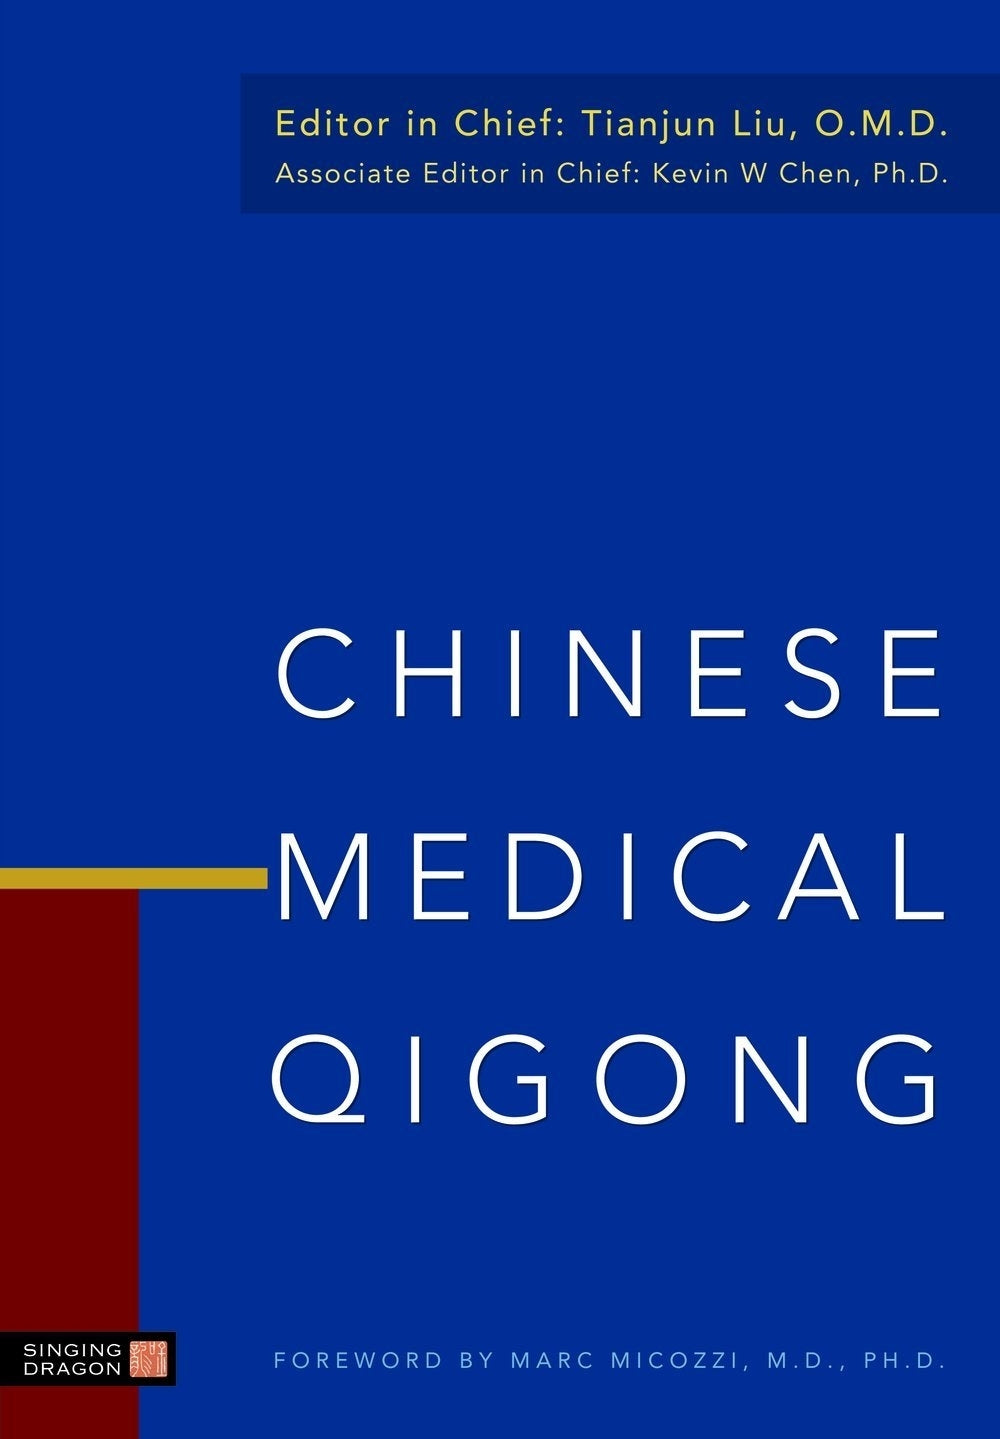 Chinese Medical Qigong by Tianjun Liu, Kevin Chen, No Author Listed